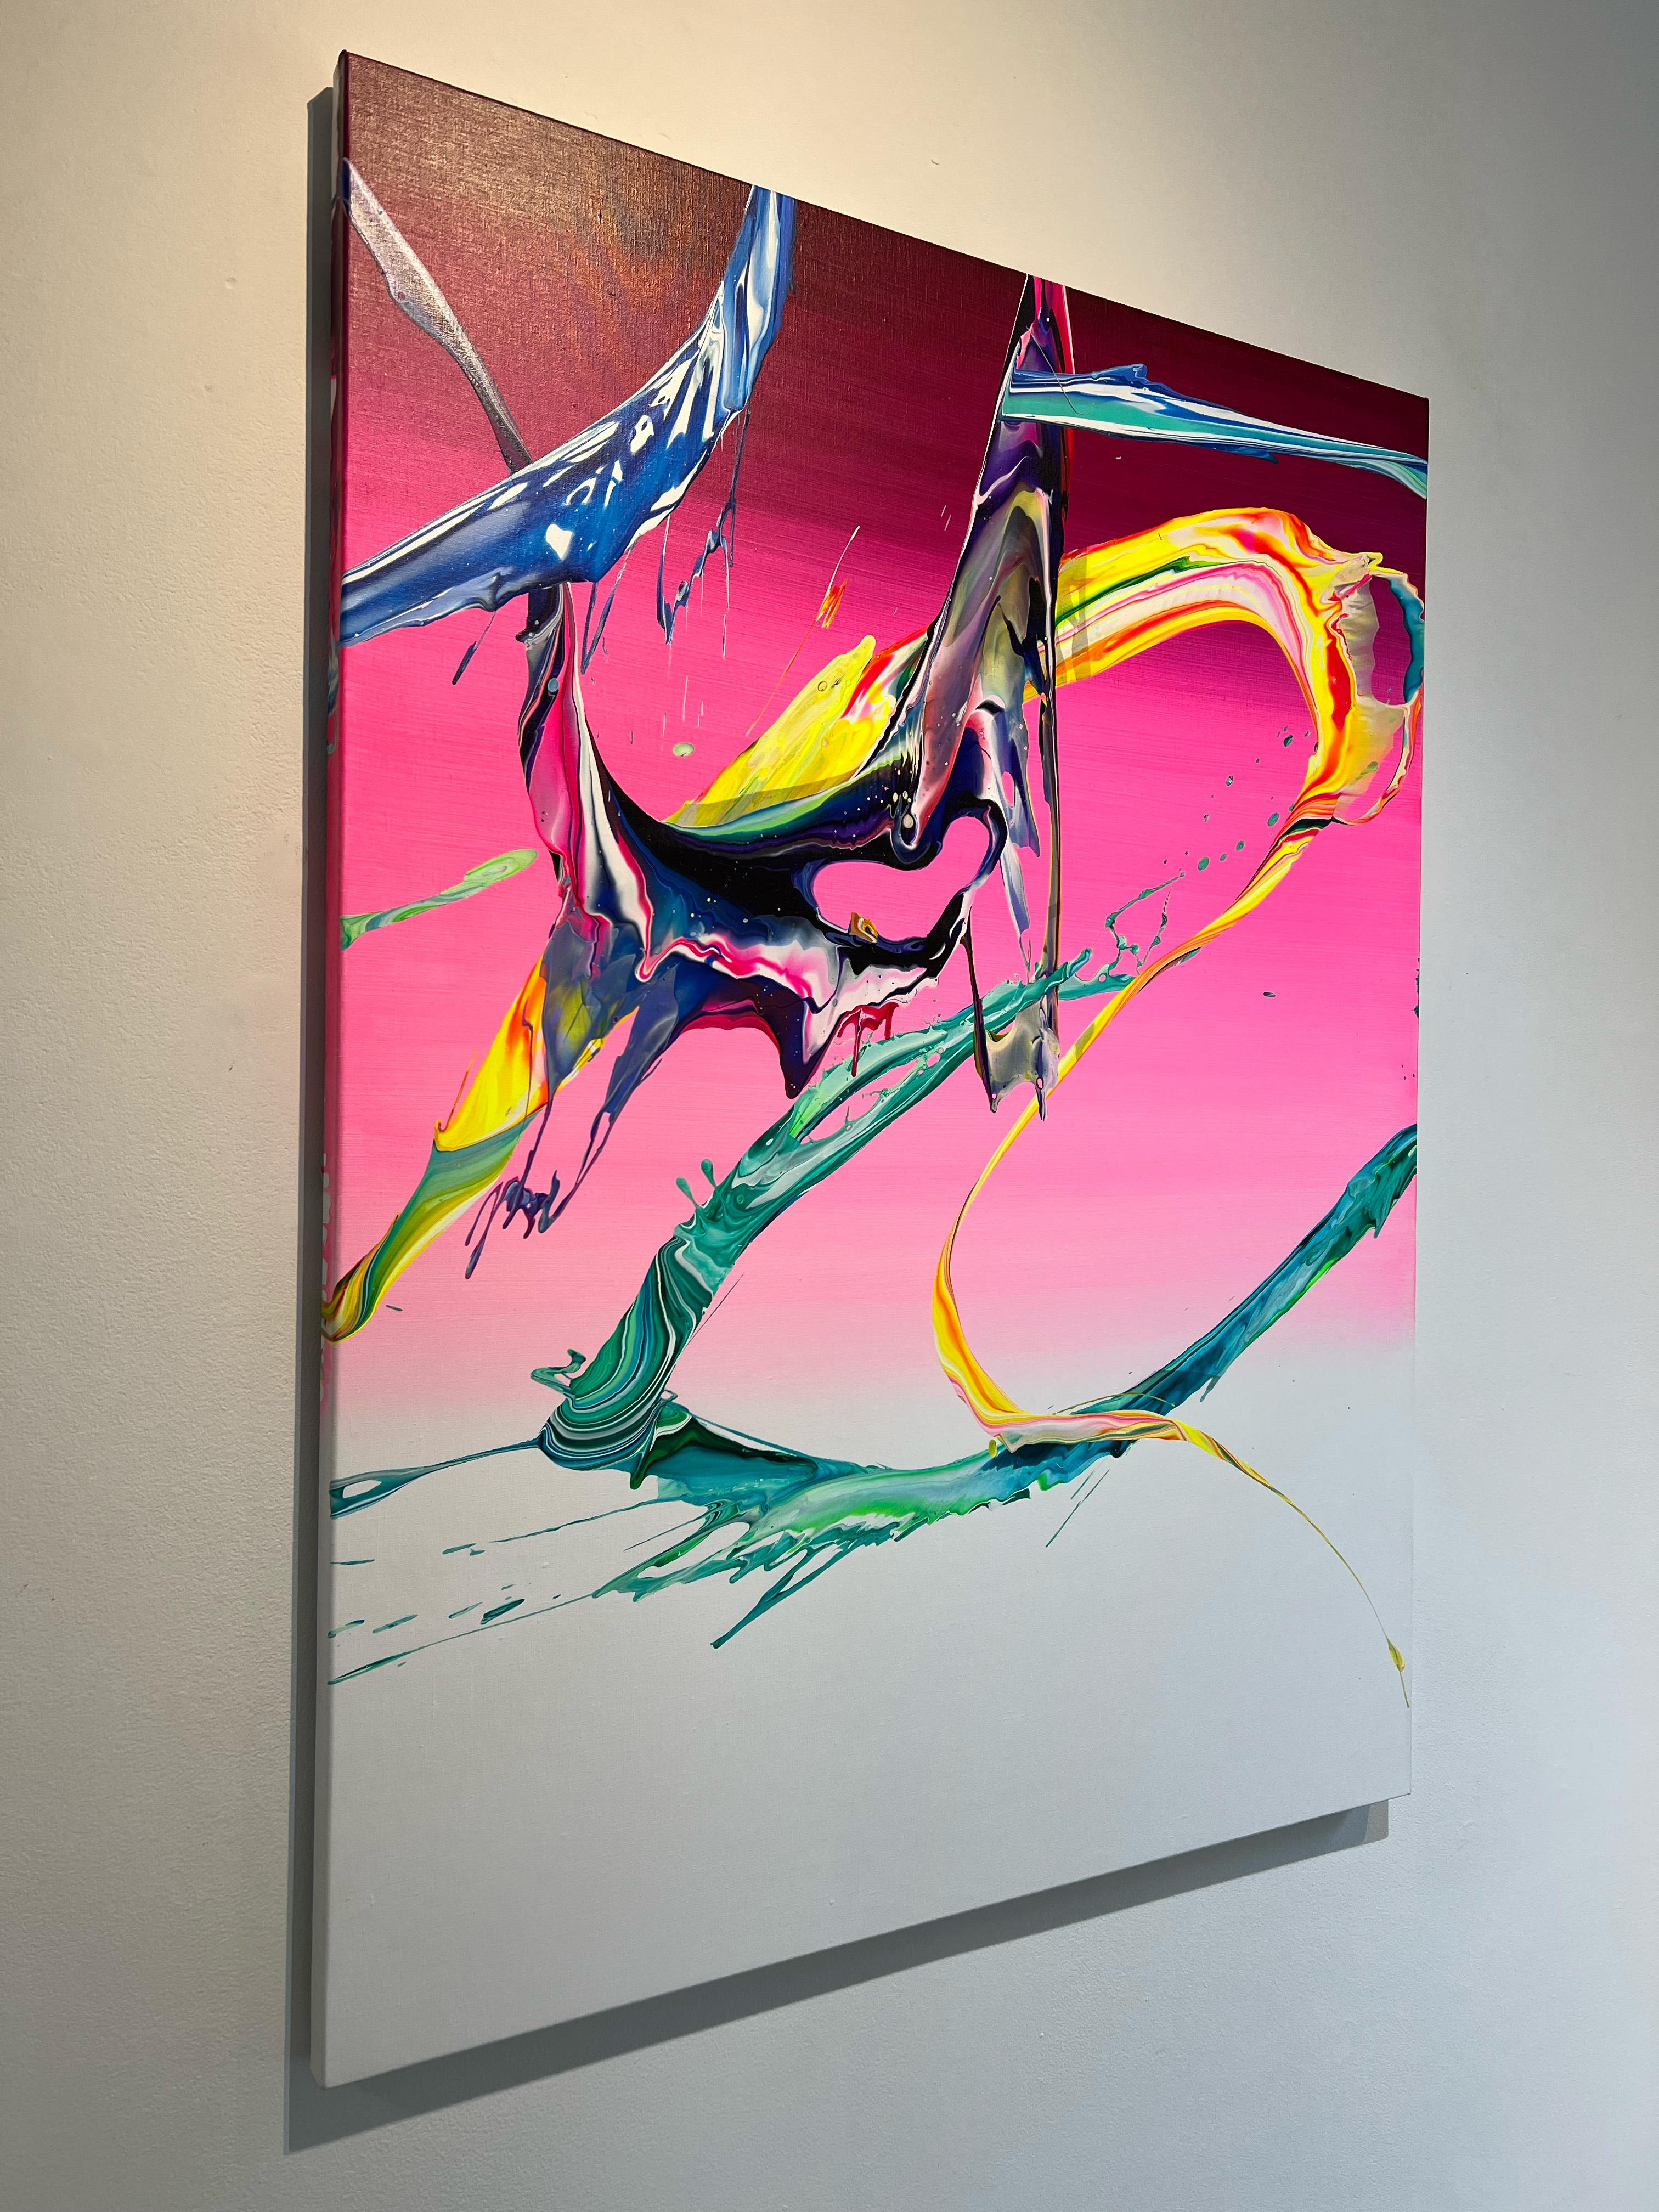 AV 763 - A Liquid Abstraction in Vivid Colors Against a Pink to White Ombré - Purple Interior Painting by Alex Voinea